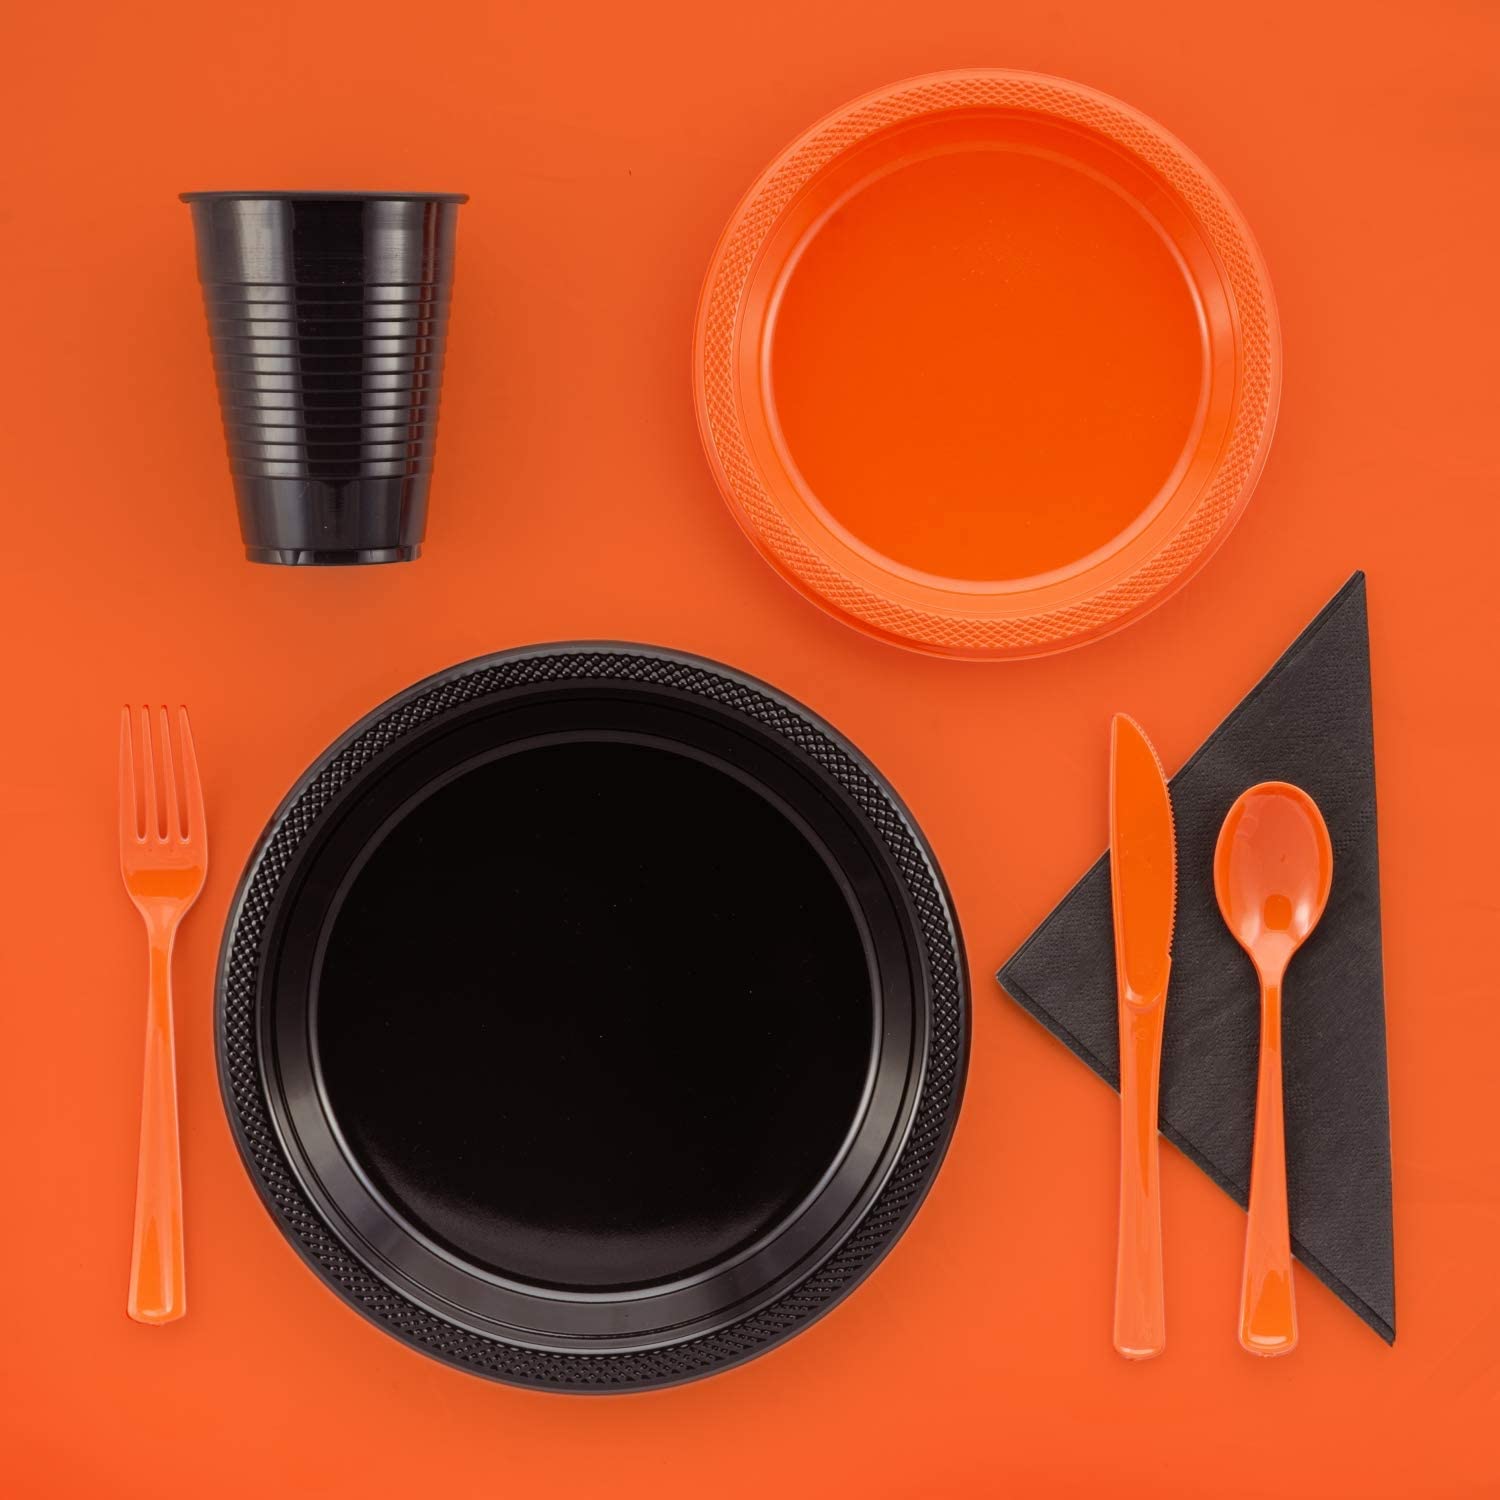 350 pcs Halloween Tableware Disposable Plastic Plates, Cups, Table Napkins, Spoon, Forks, and Knives (Black and Orange)